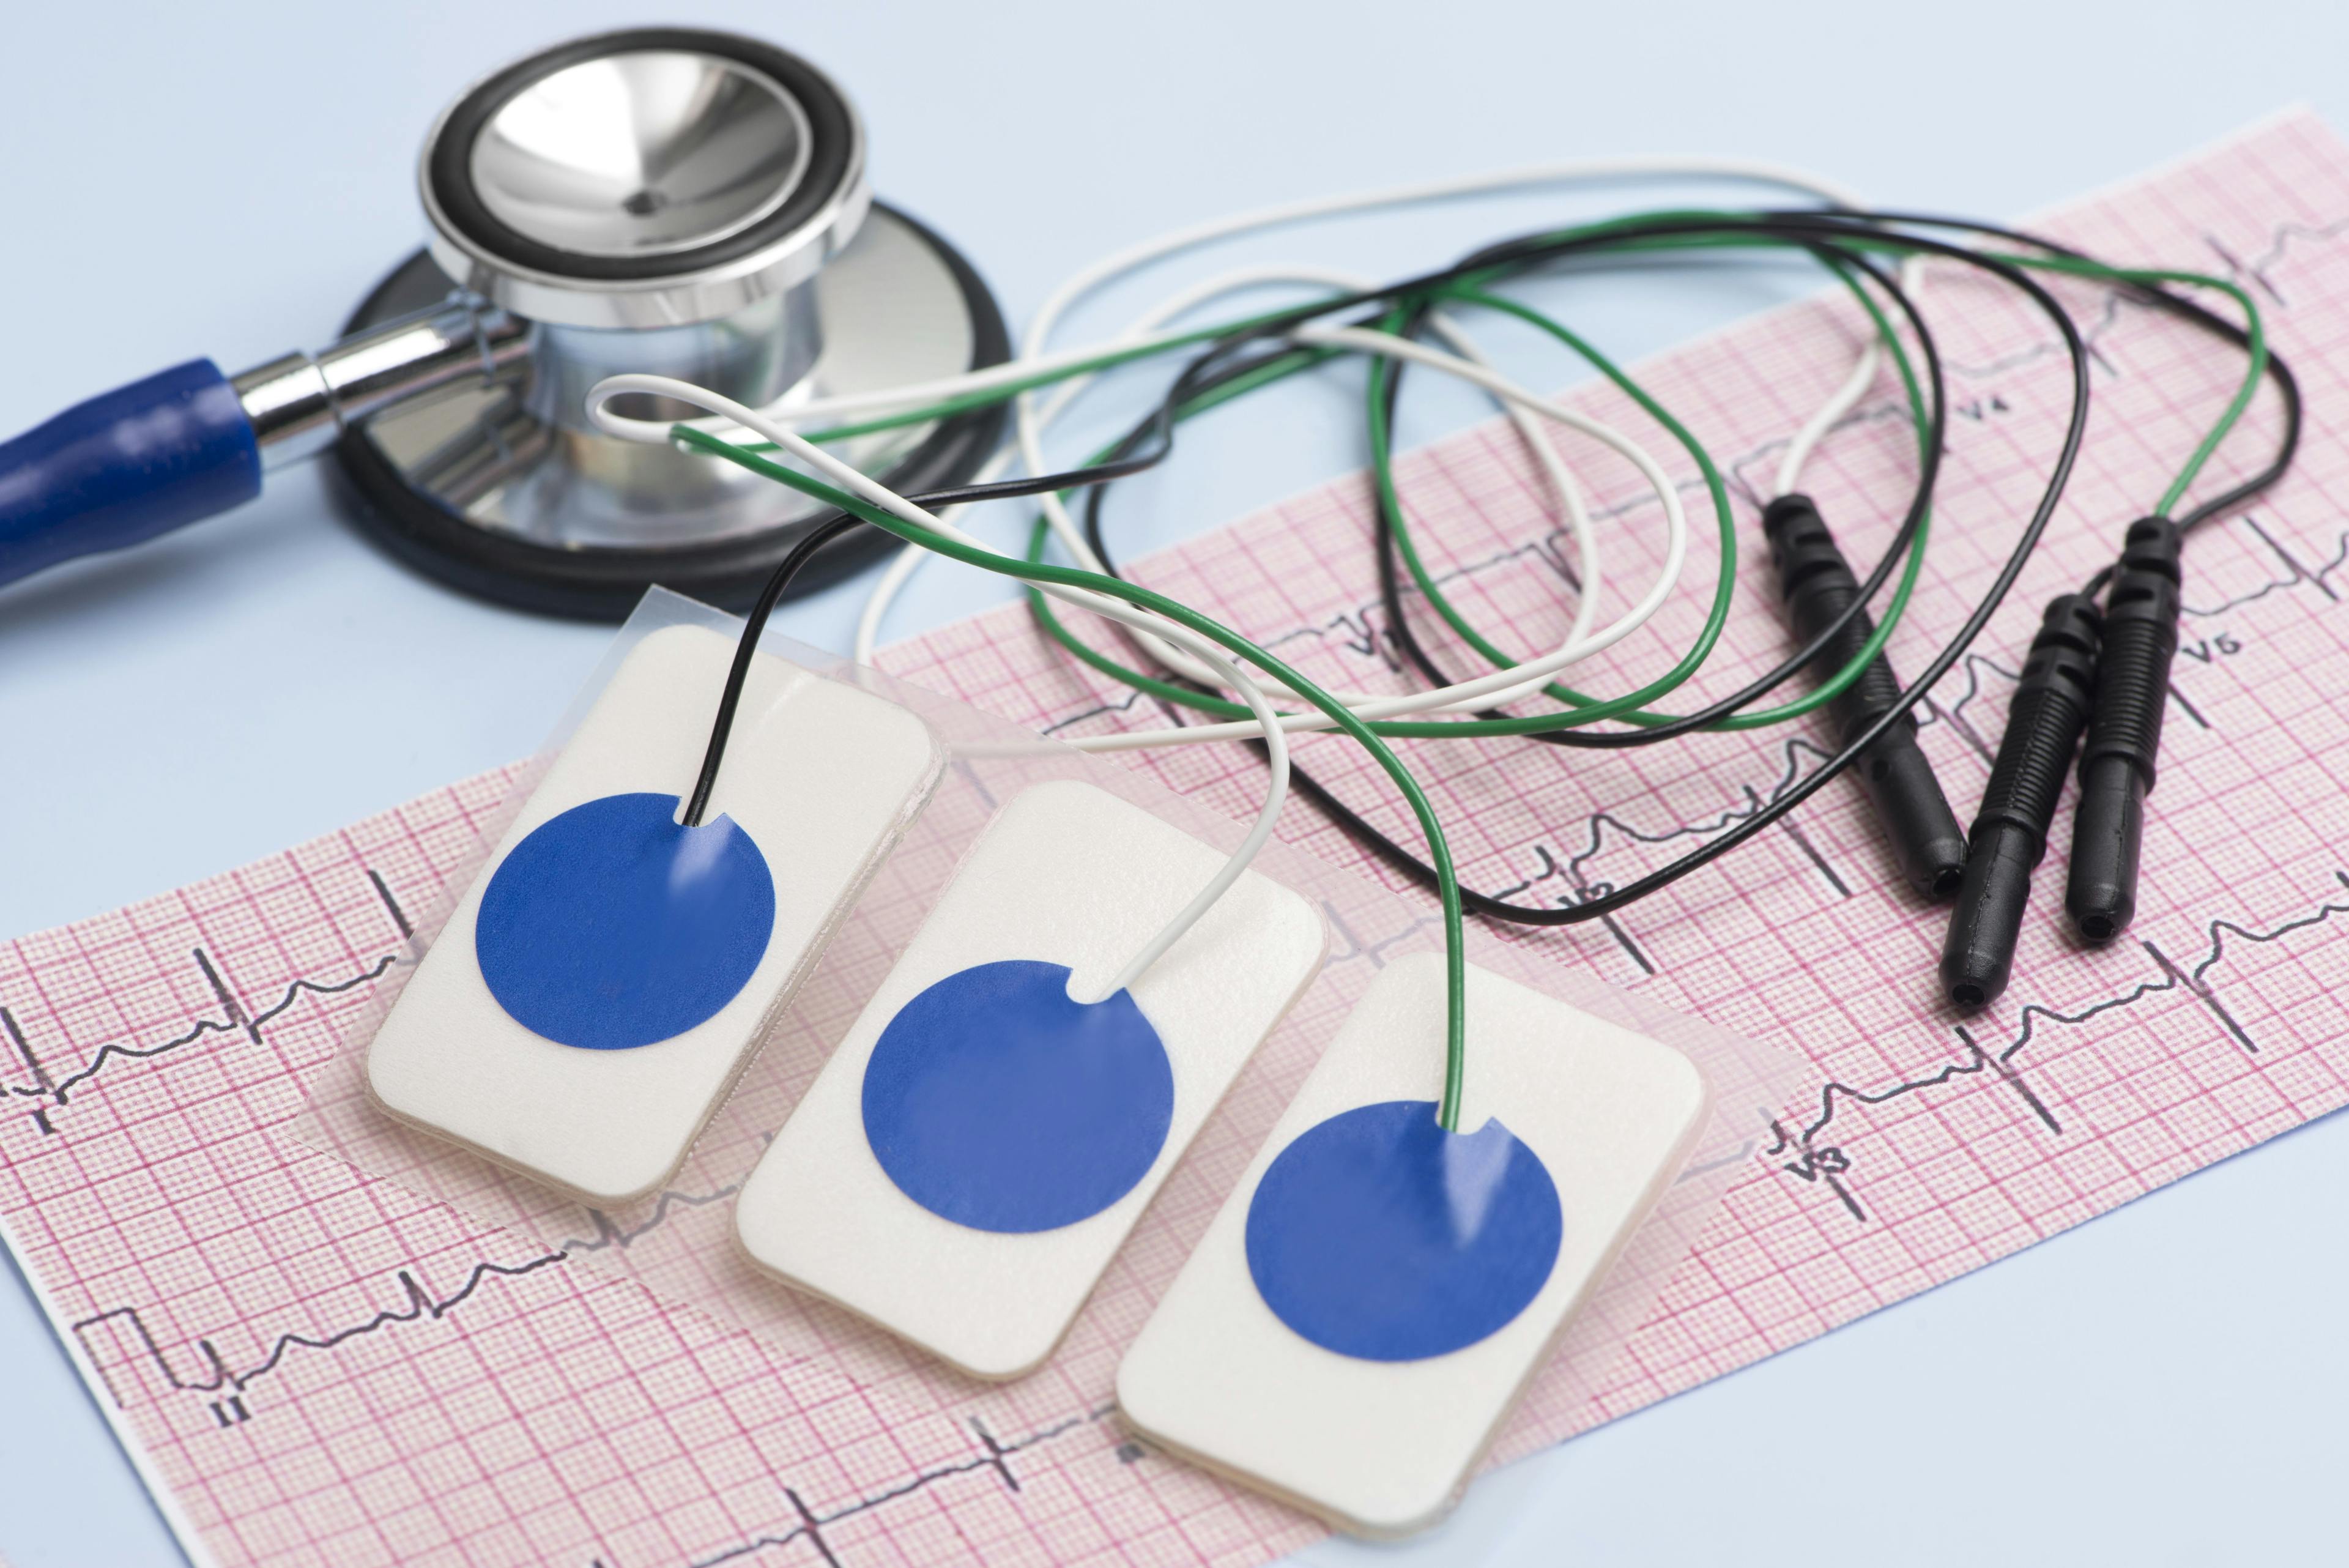 Medical equipment used to assess arrhythmias.